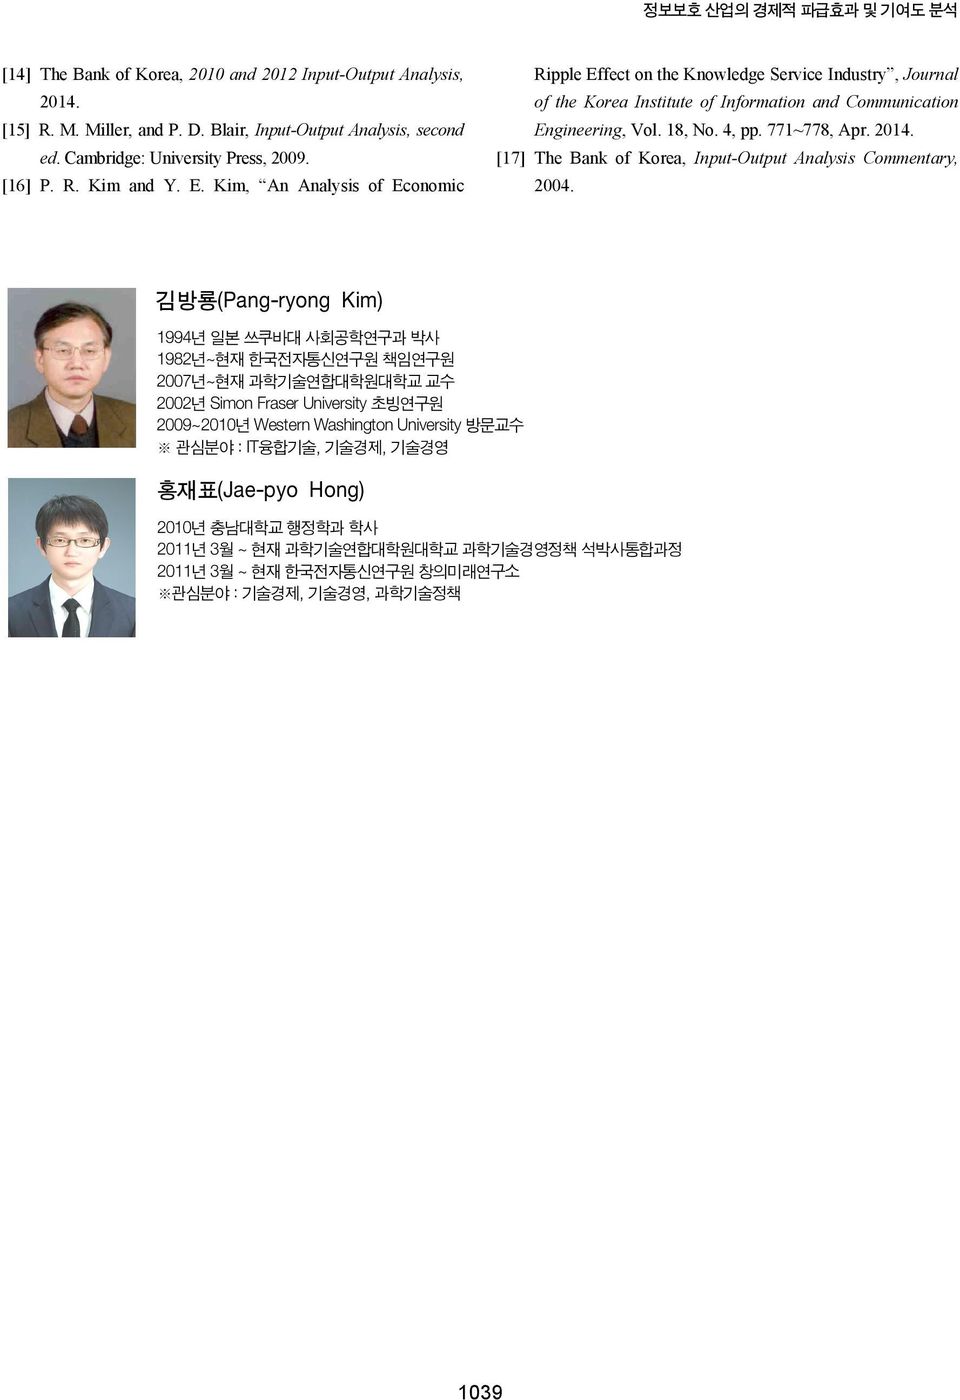 771~778, Apr. 2014. [17] The Bank of Korea, Input-Output Analysis Commentary, 2004.